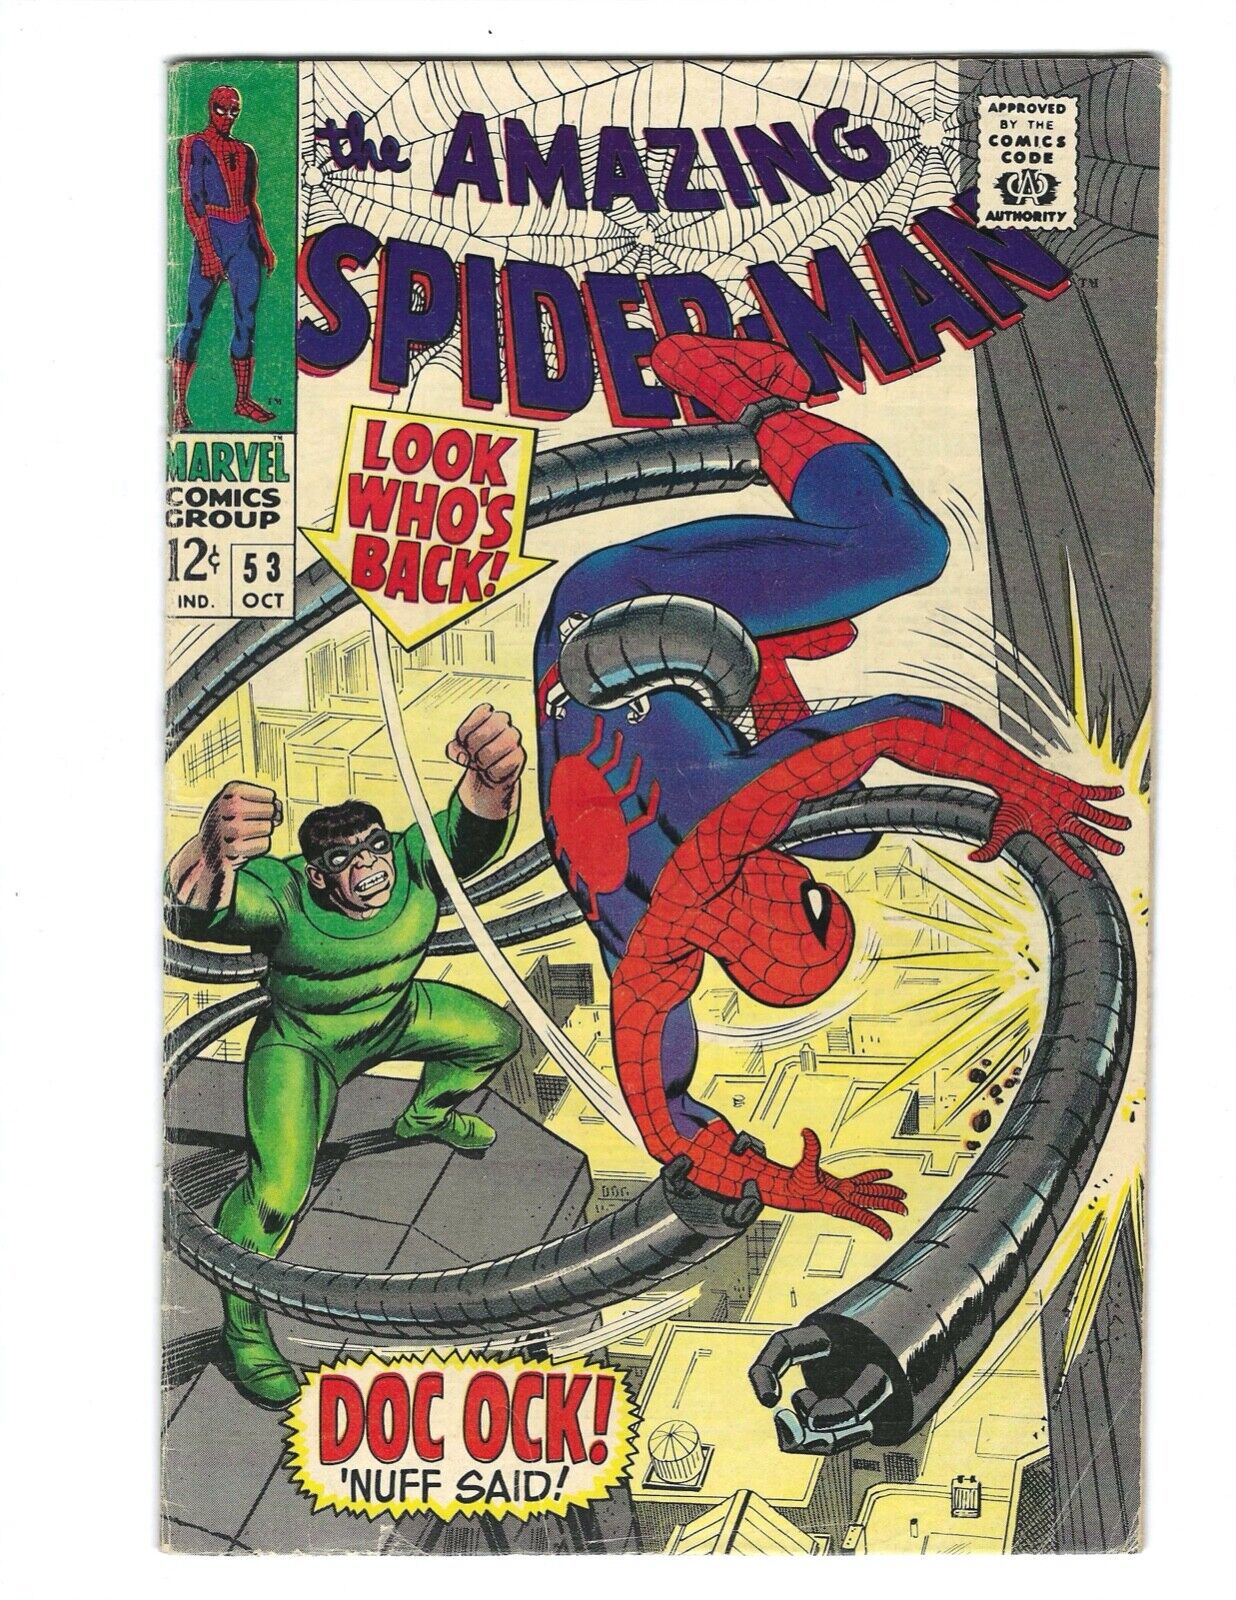 Amazing Spider-Man #53 1967 VG+/FN- Look Who's Back Doc Octopus  Combine Ship